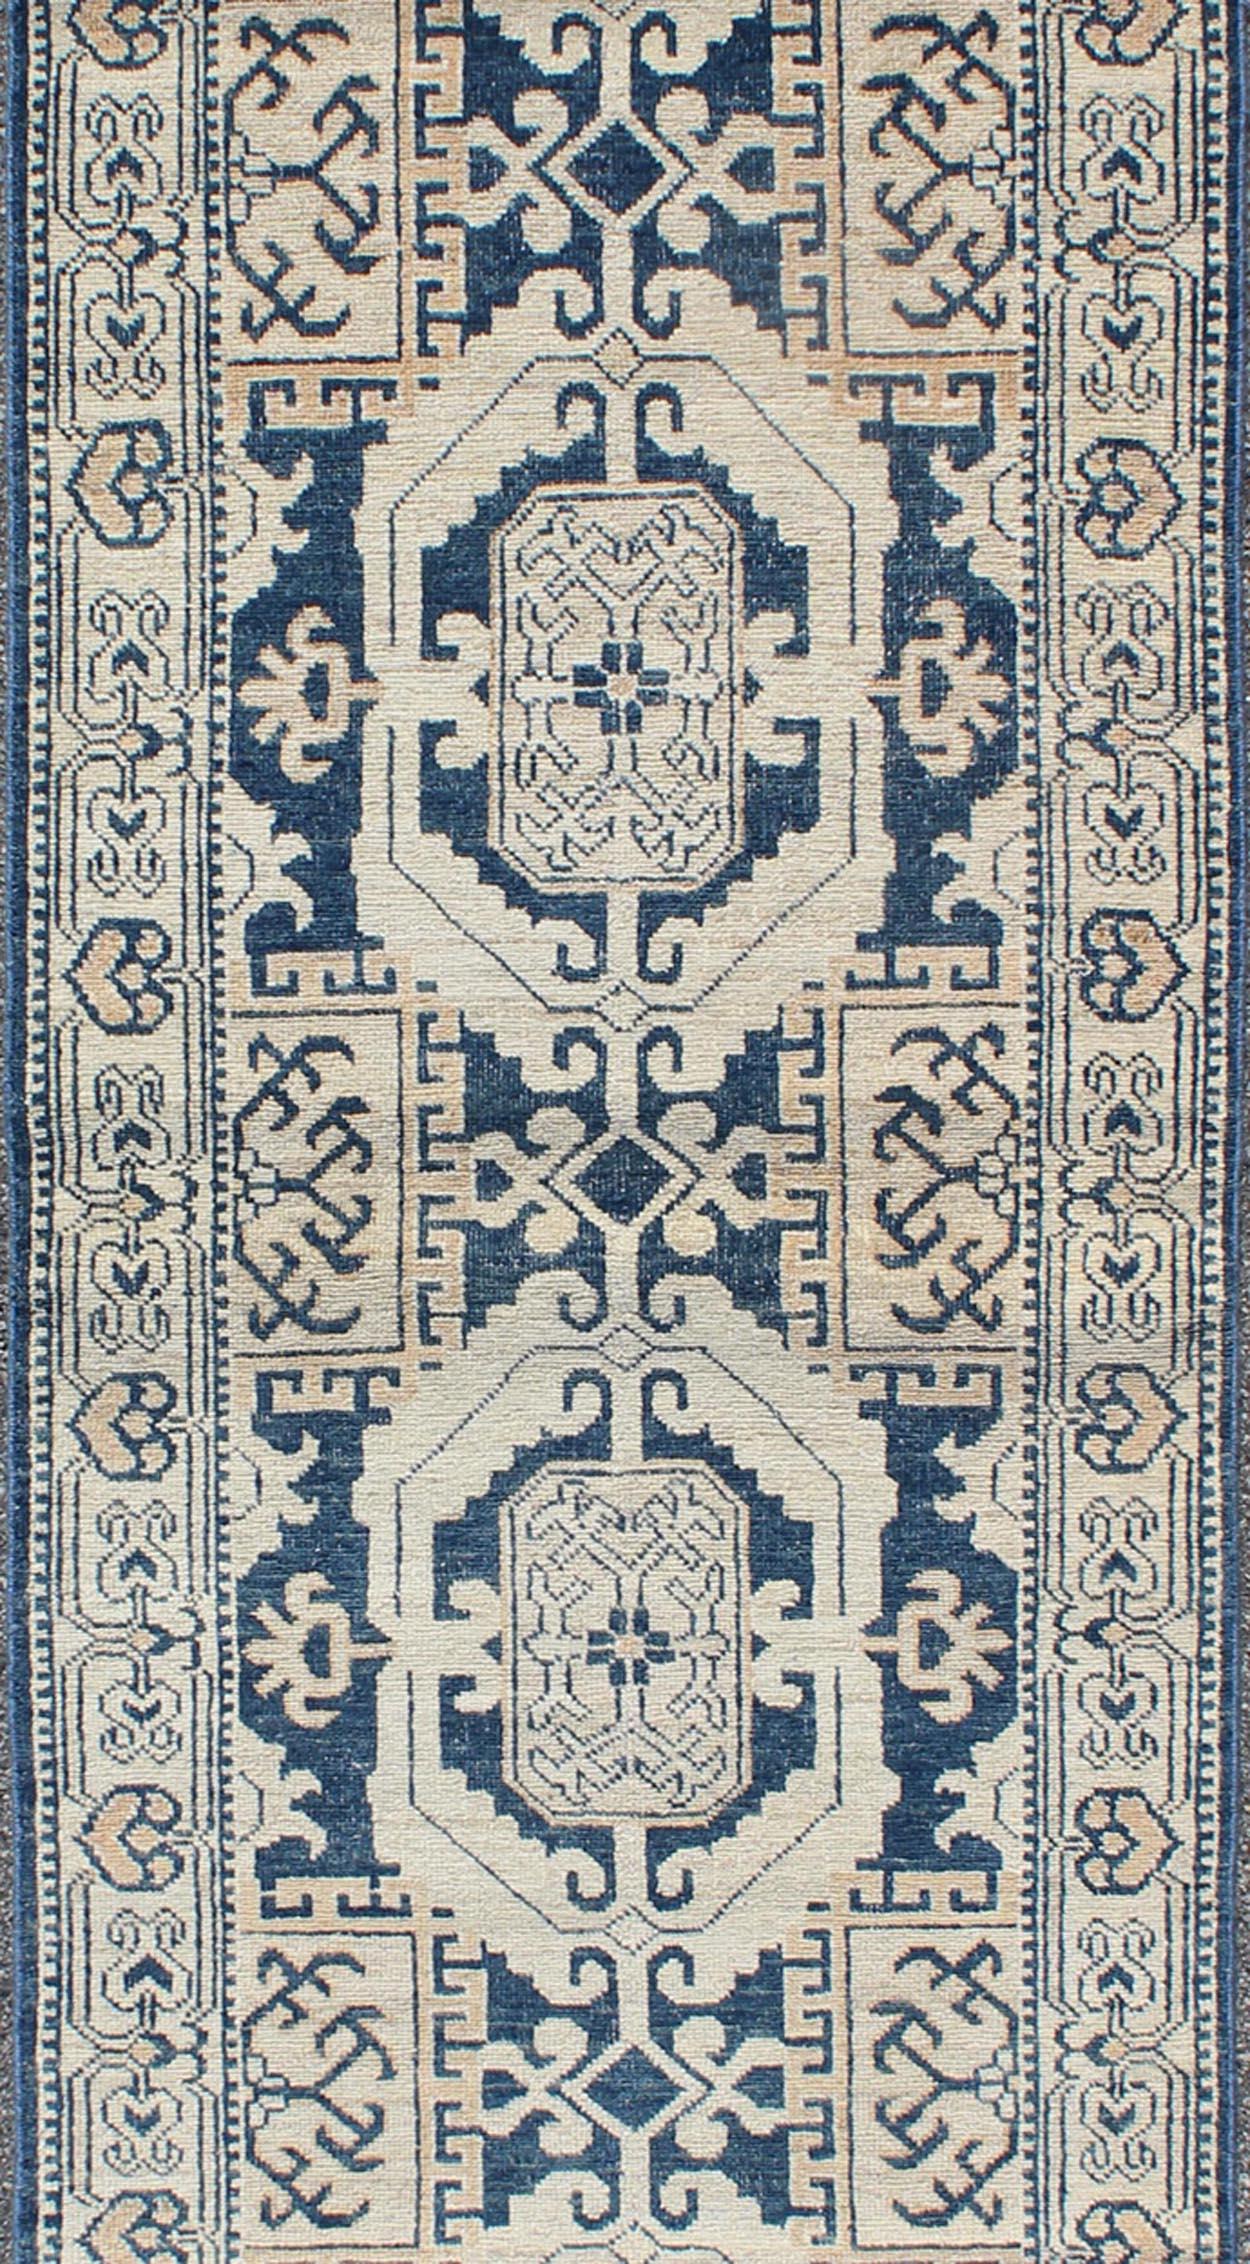 Khotan with Geometric Medallions, Keivan Woven Arts rug MP-1310-93, country of origin / type: Afghanistan / Khotan, circa Early-21st Century.

Measures: 2'11 x 10'3.

This Khotan features a geometric multi-medallion design flanked by a repeating